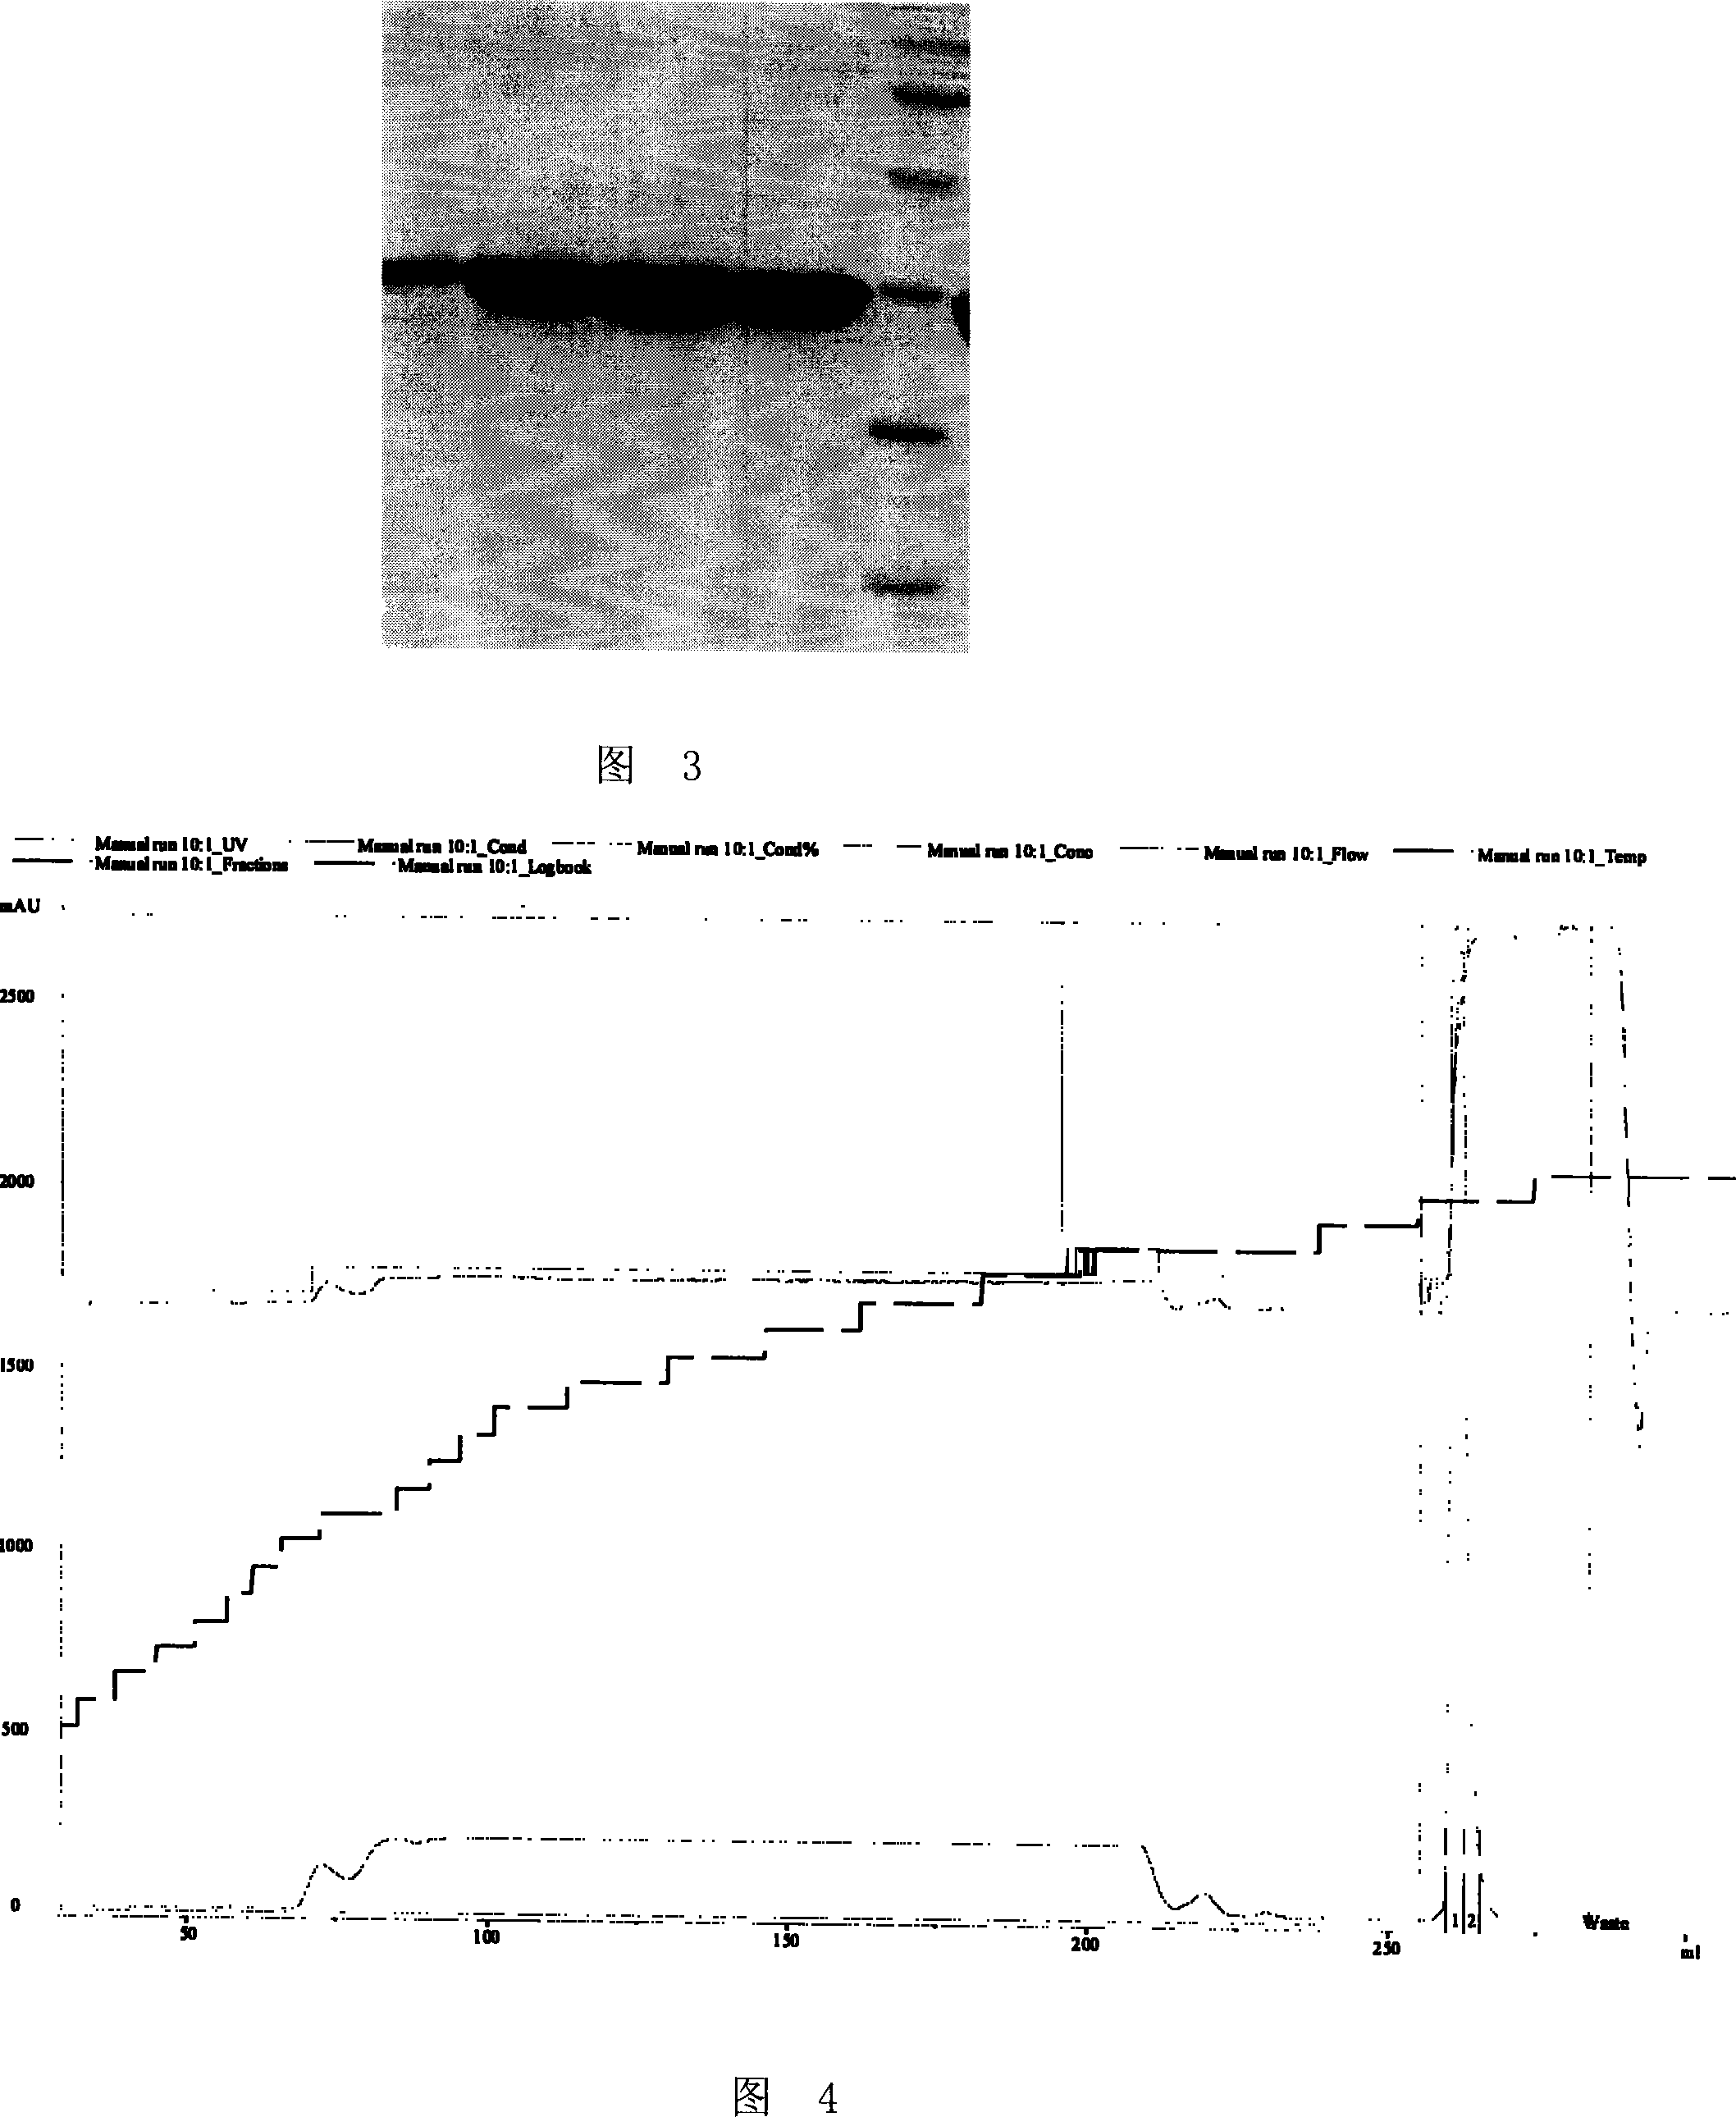 Immunochromatographic assay test paper for detecting staphylococcal enterotoxin B and preparation method thereof